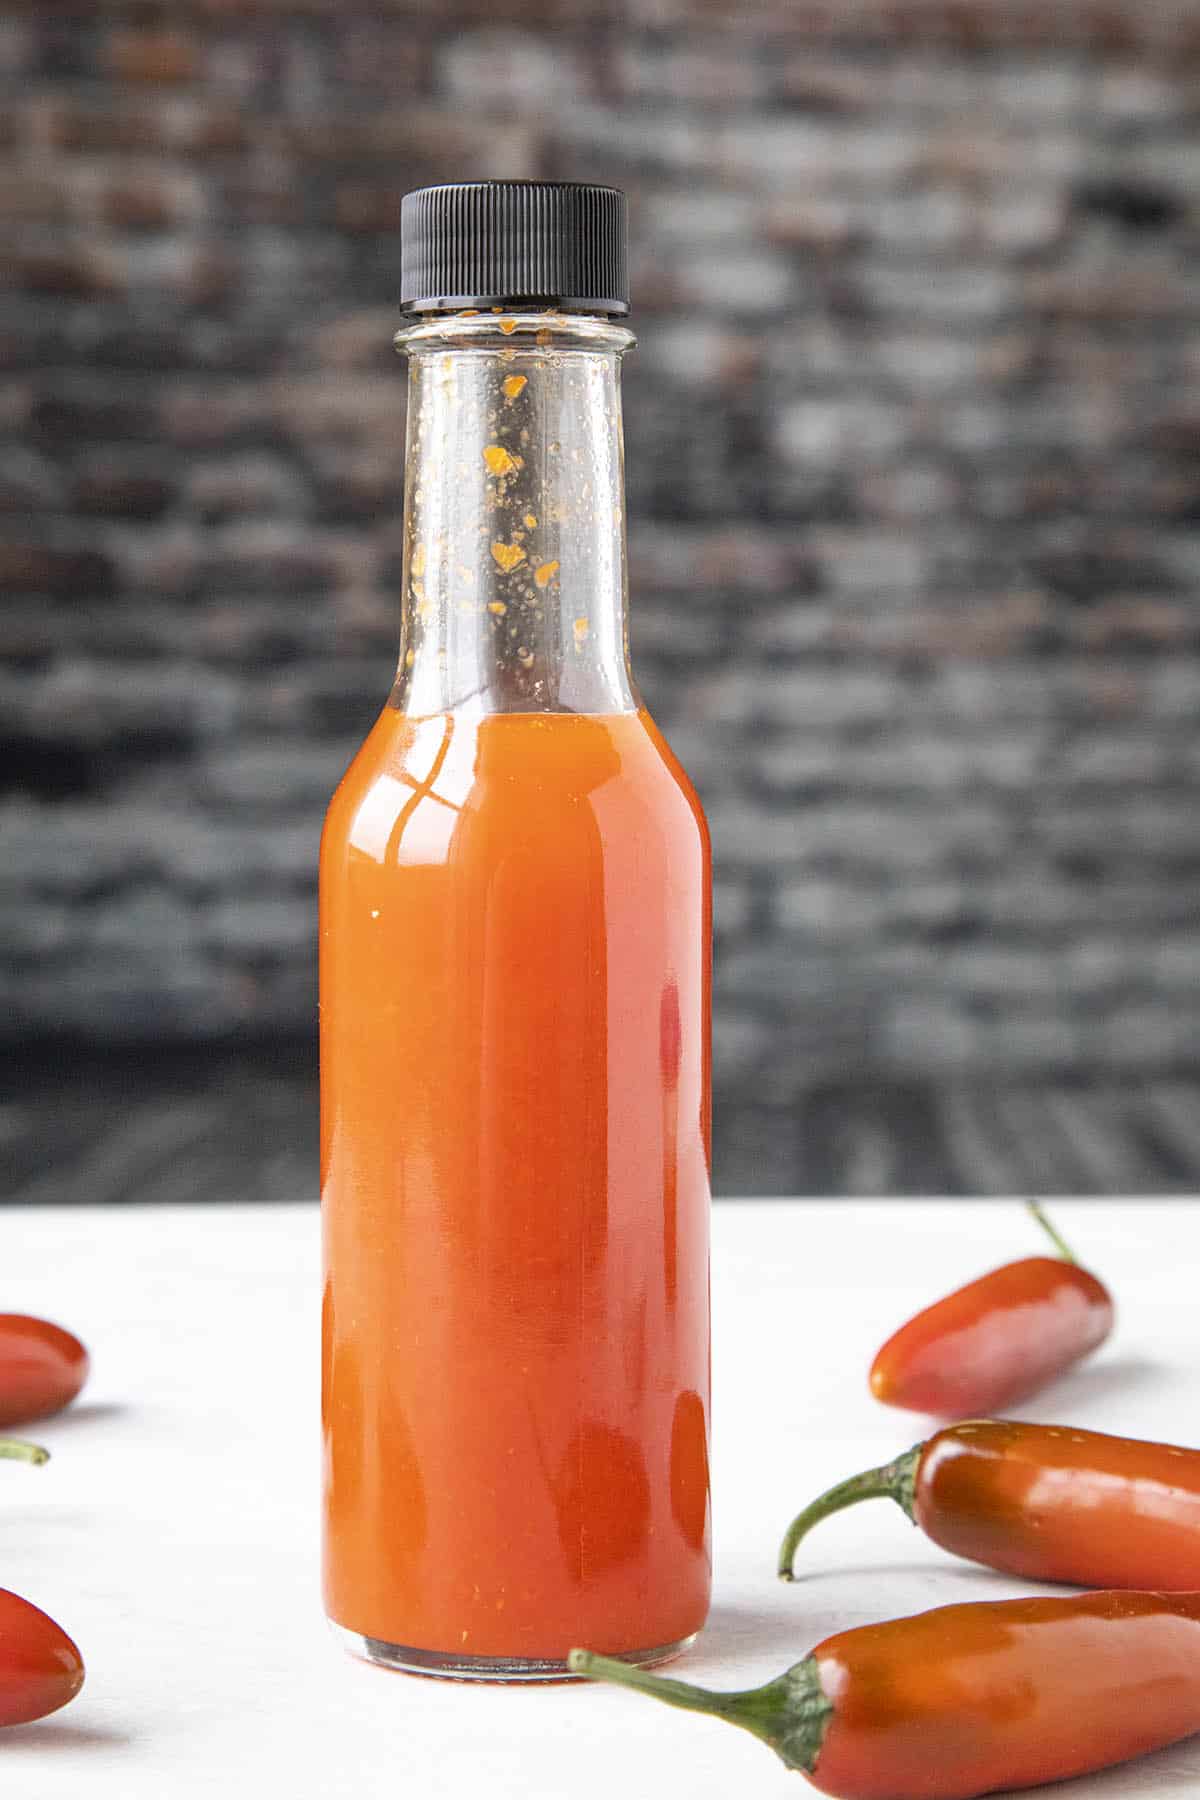 Chili Pequin Hot Sauce Recipe: Step by Step Guide